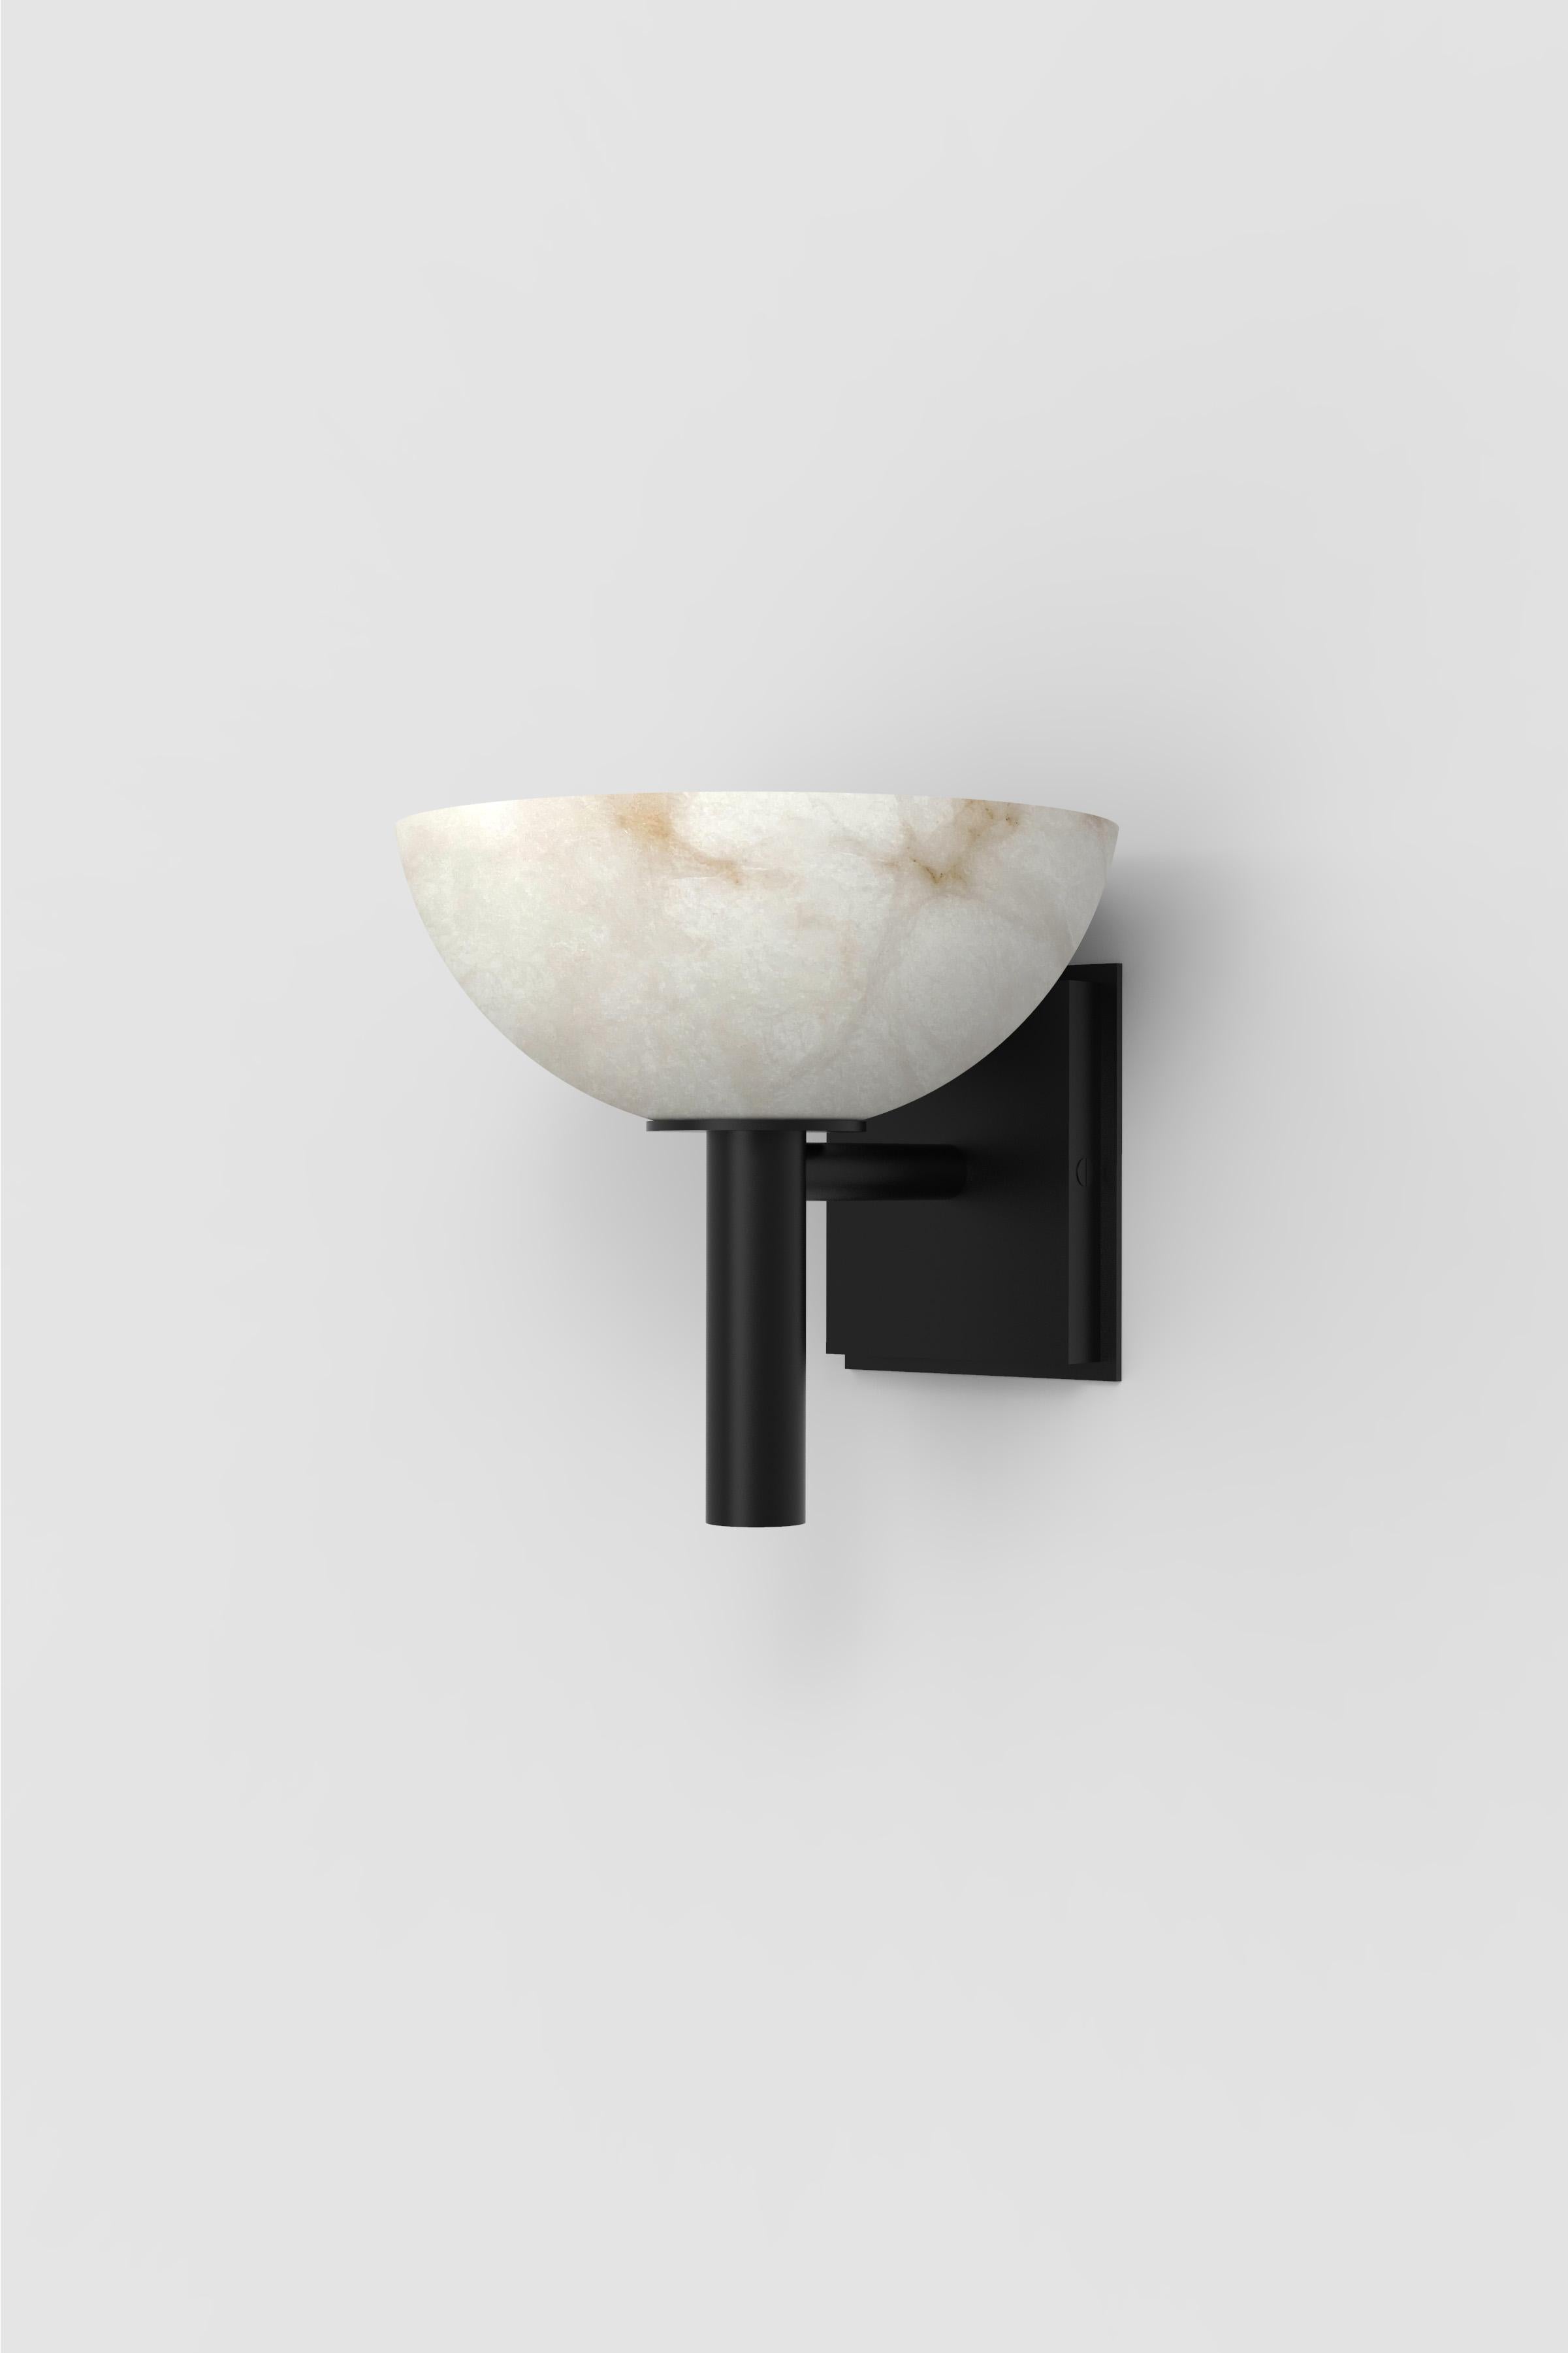 Orphan Work 200A Sconce BLK
Shown in alabaster with blackened brass 
Available in brushed brass and blackened brass
Measures: 8.625” height x 9.75” depth x 9.5